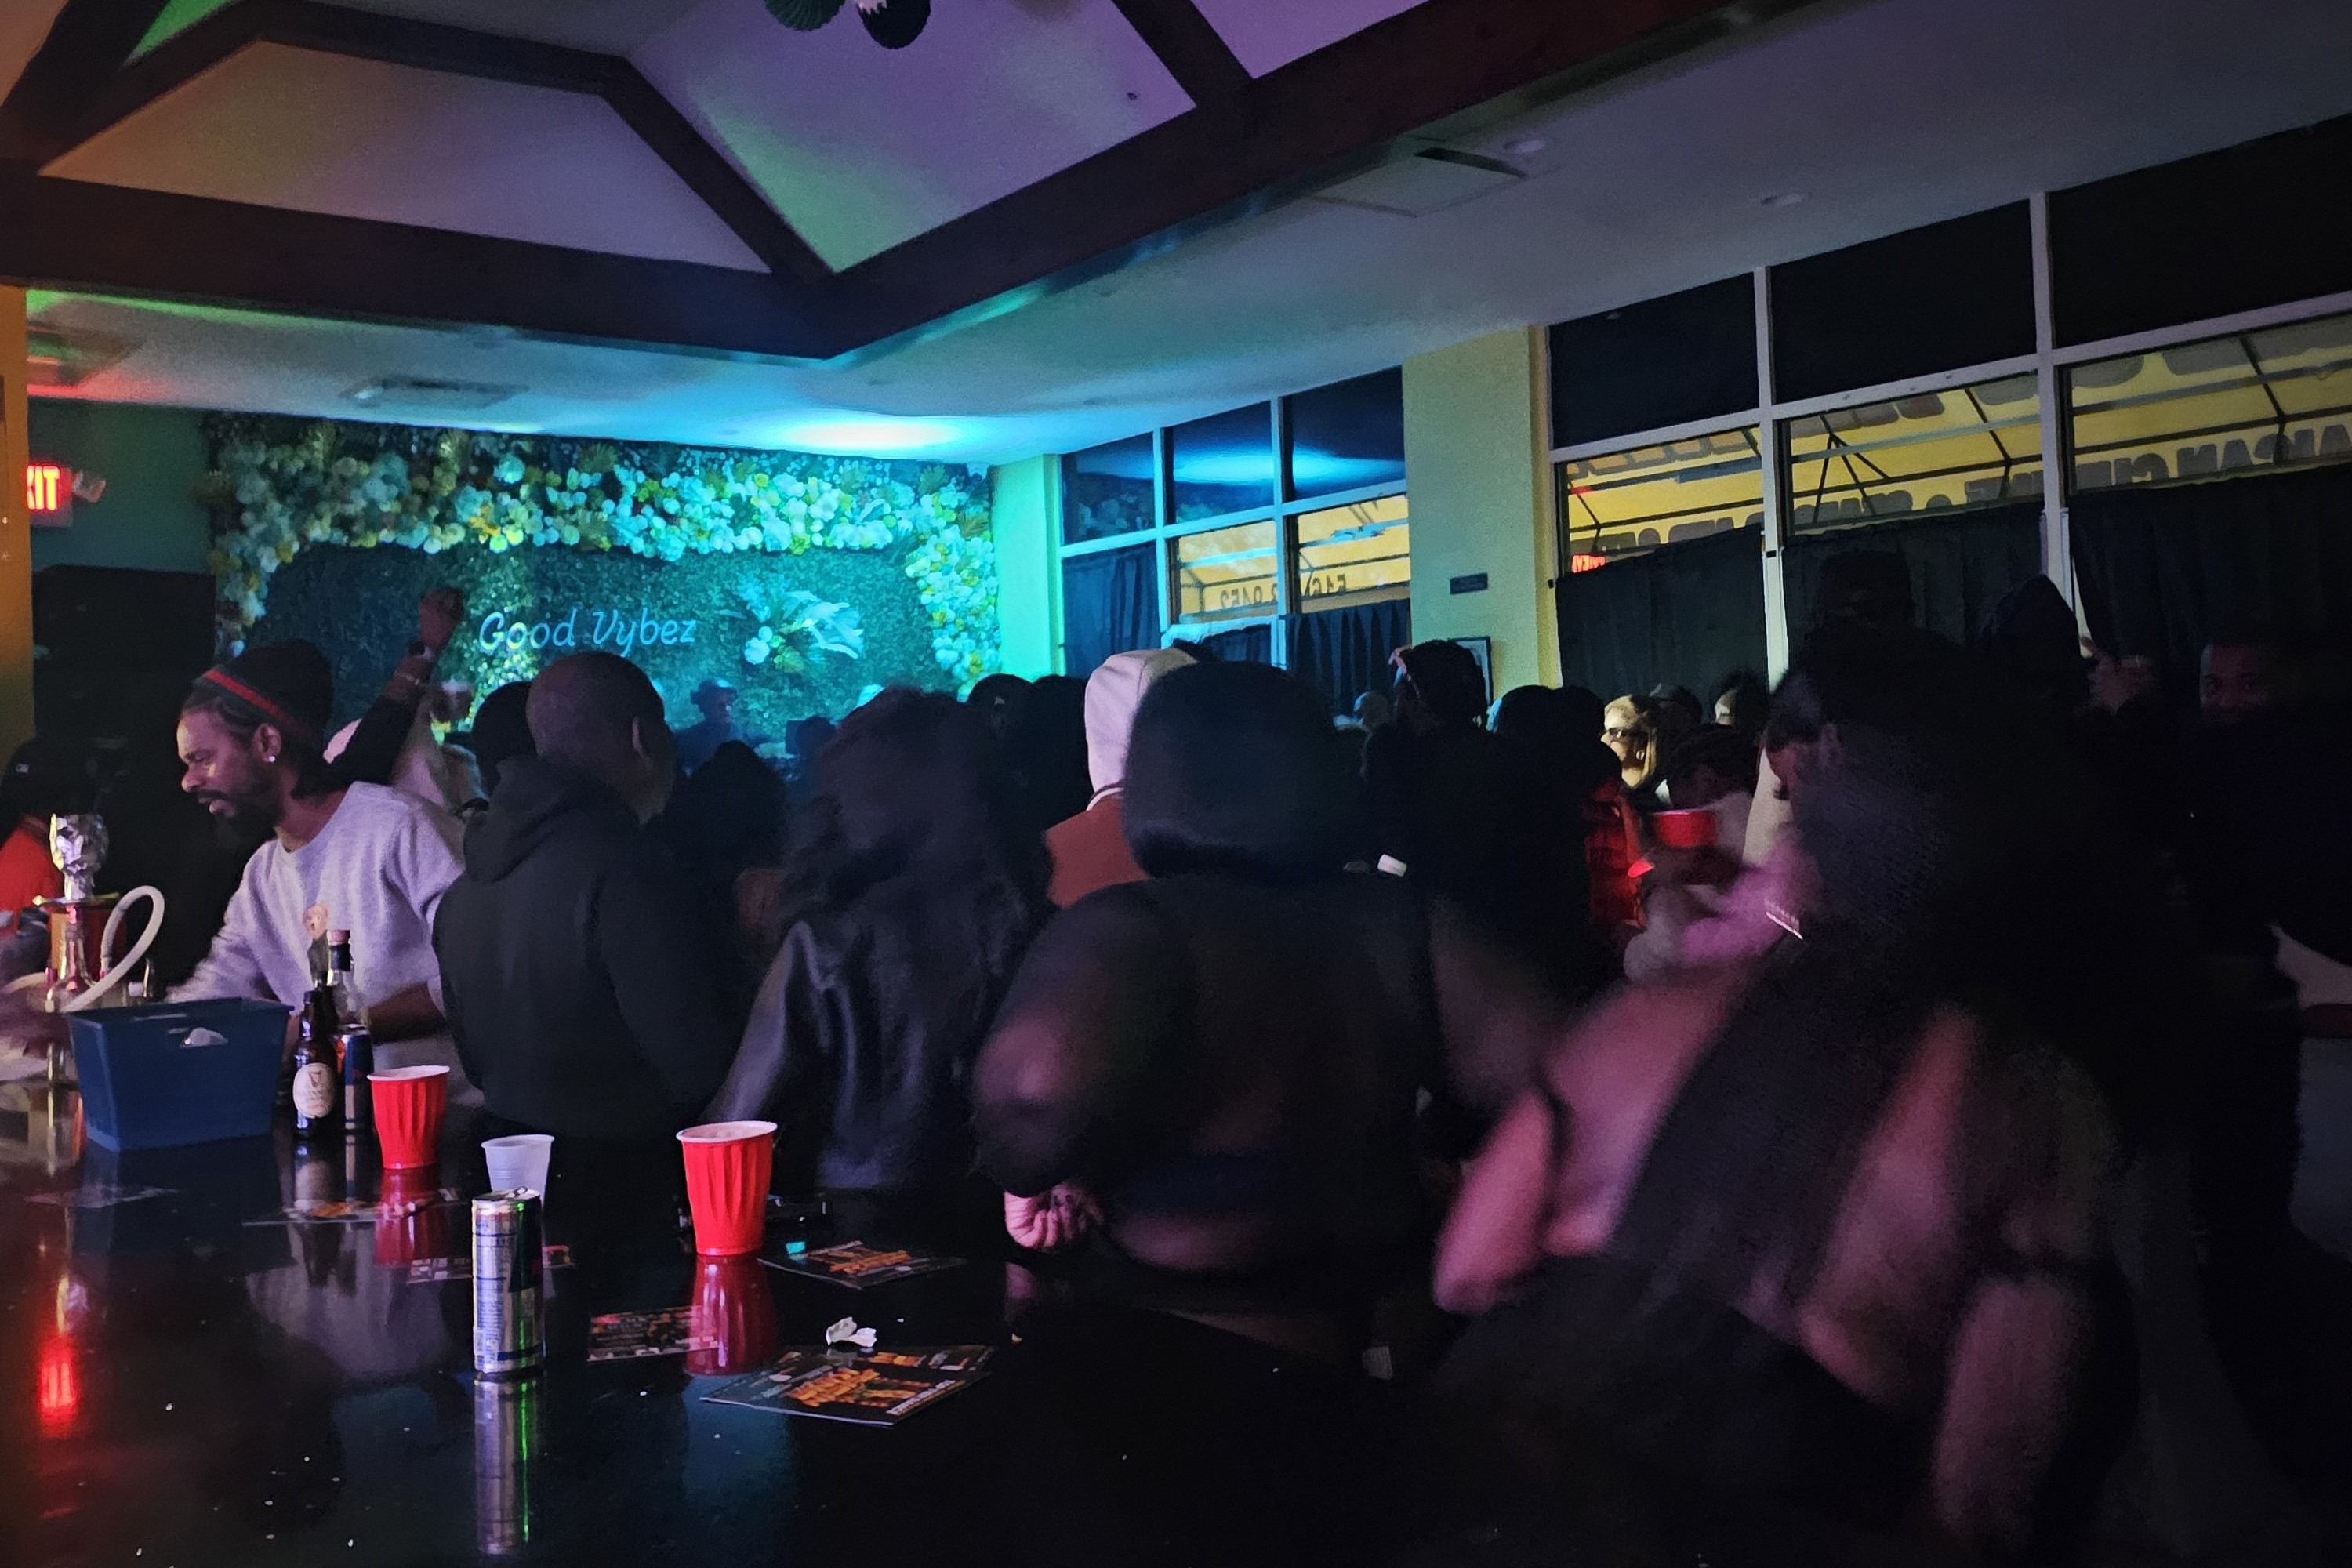 Private partygoers stand with their backs to the bar, and face the neon blue Good Vybez sign over floral backdrop above the stage.